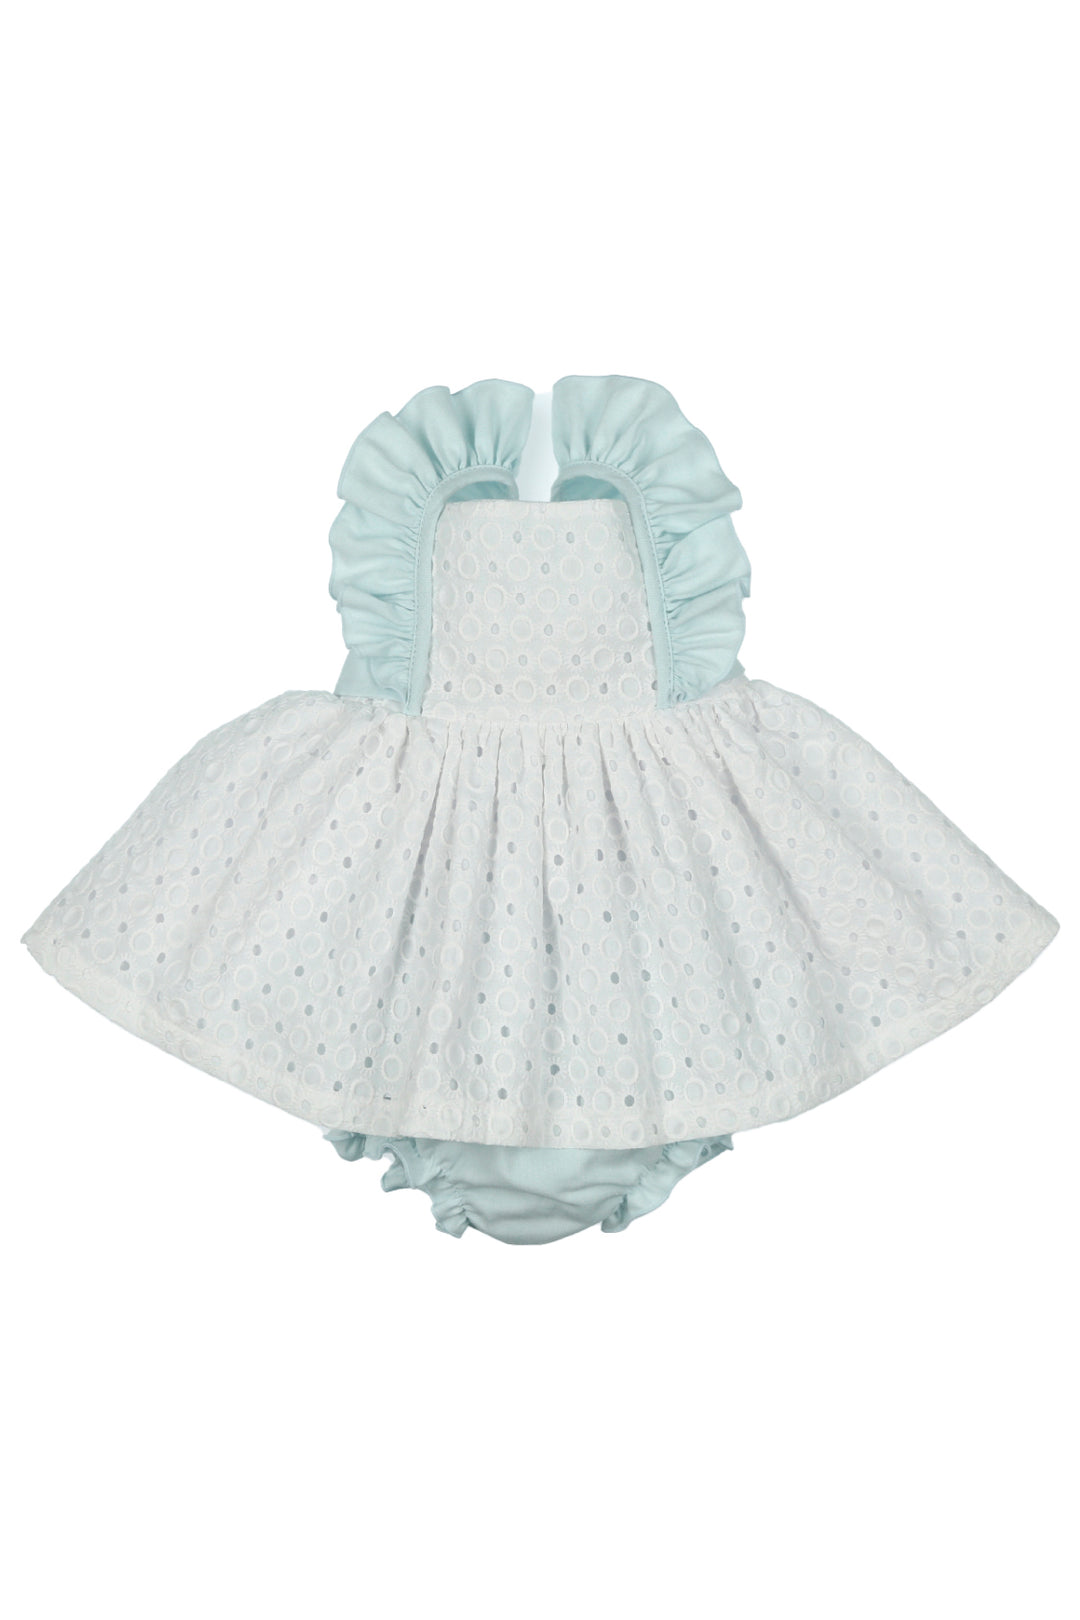 Mac Ilusión PREORDER "Skyla" White Broderie Anglaise Dress & Bloomers | Millie and John